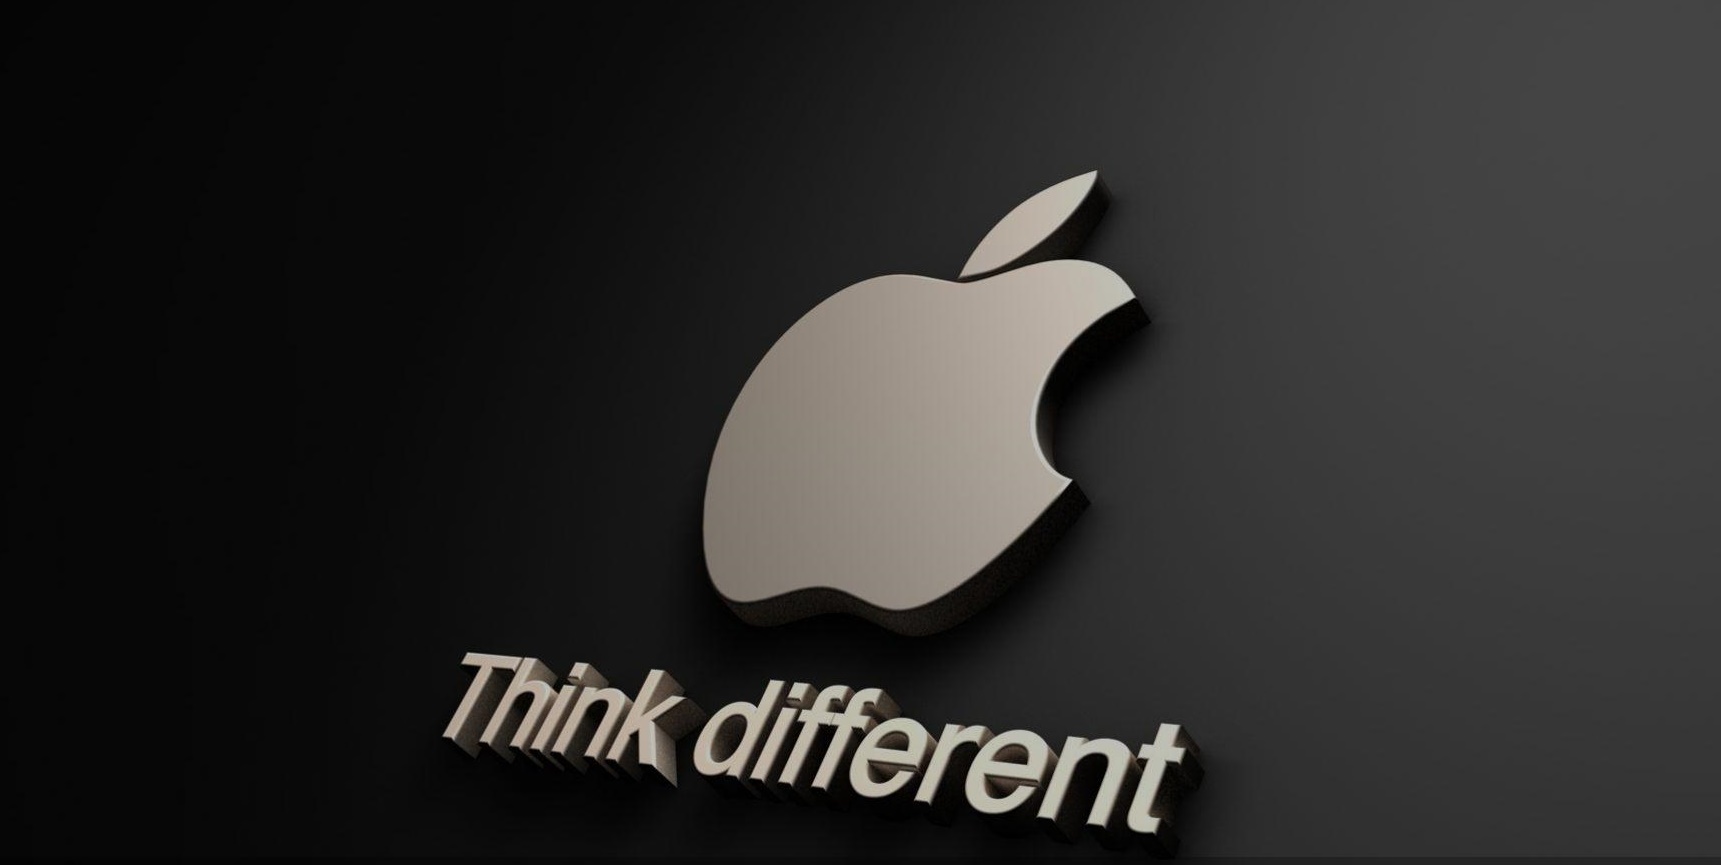 story about the logo of apple products